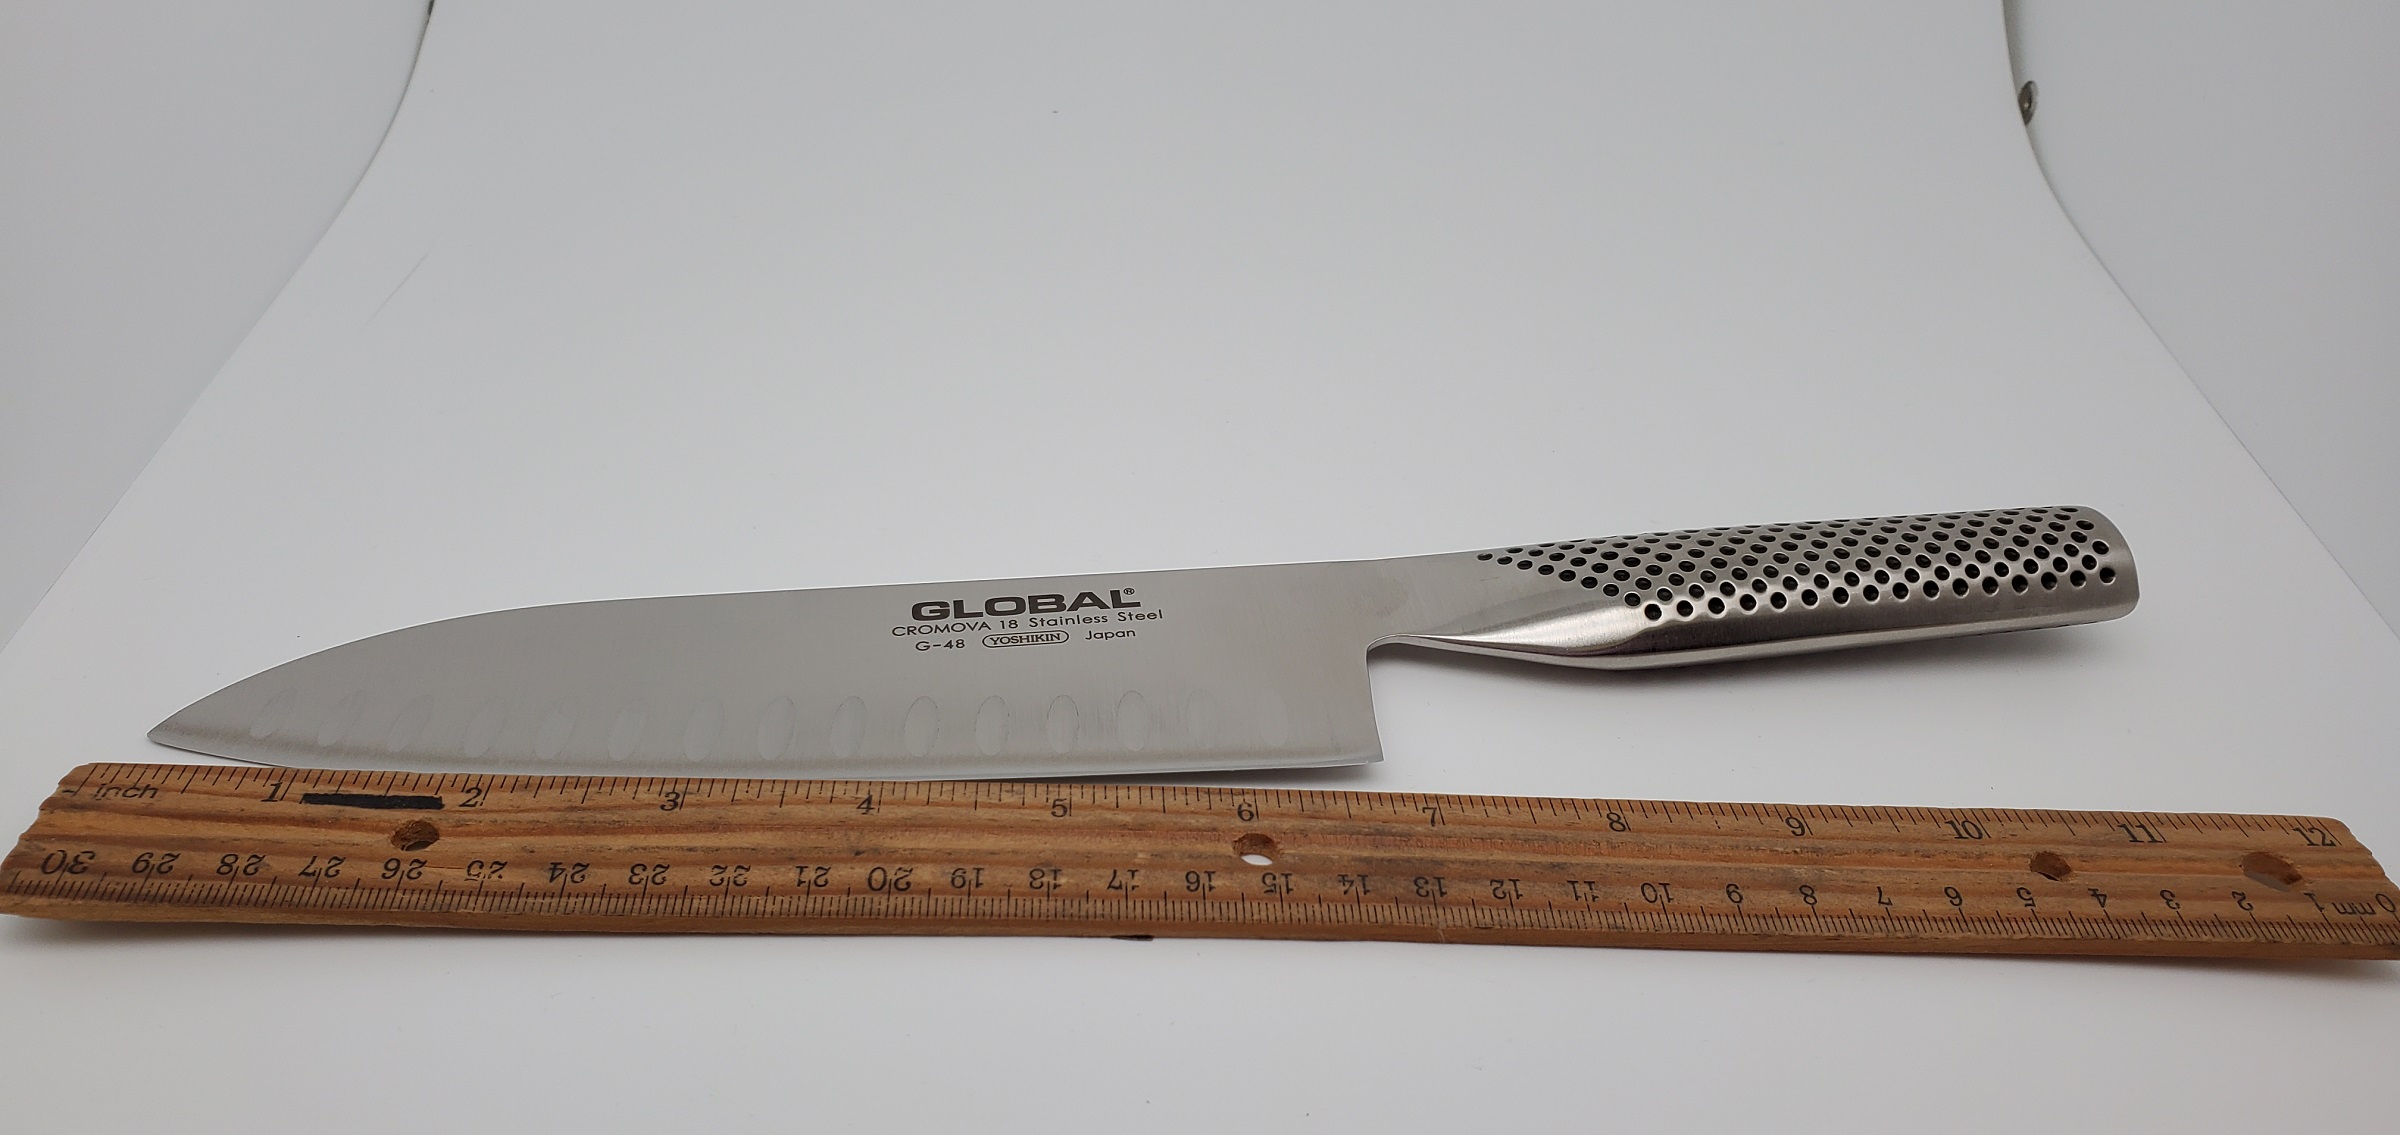 How to sharpen your Global Knives with Mr Global 